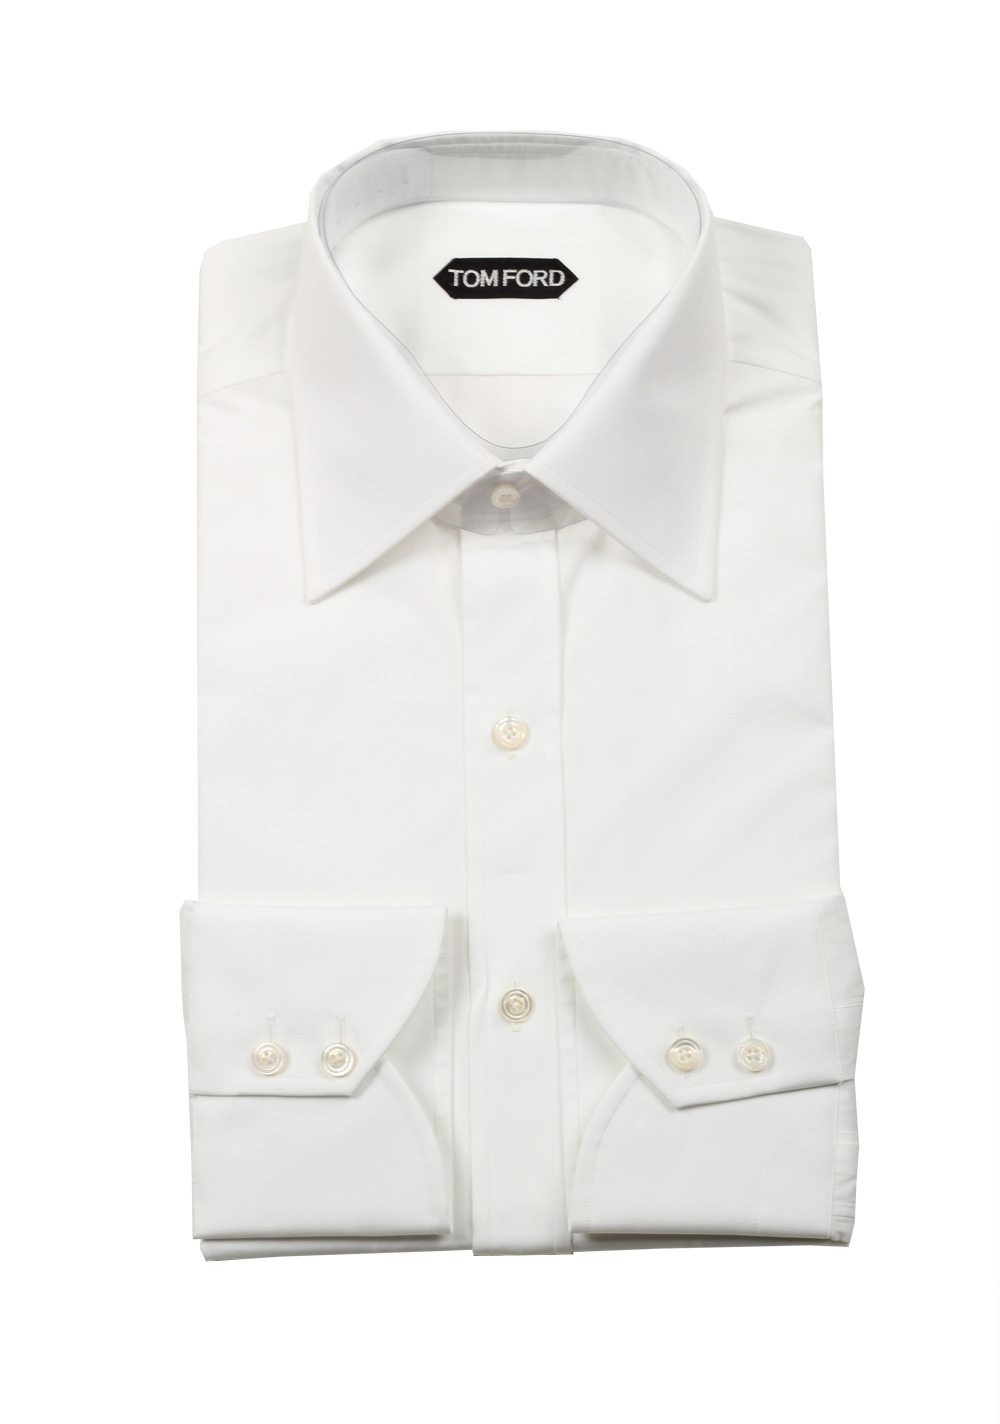 TOM FORD Solid White Dress Shirt Size 38 / 15 U.S. | Costume Limité